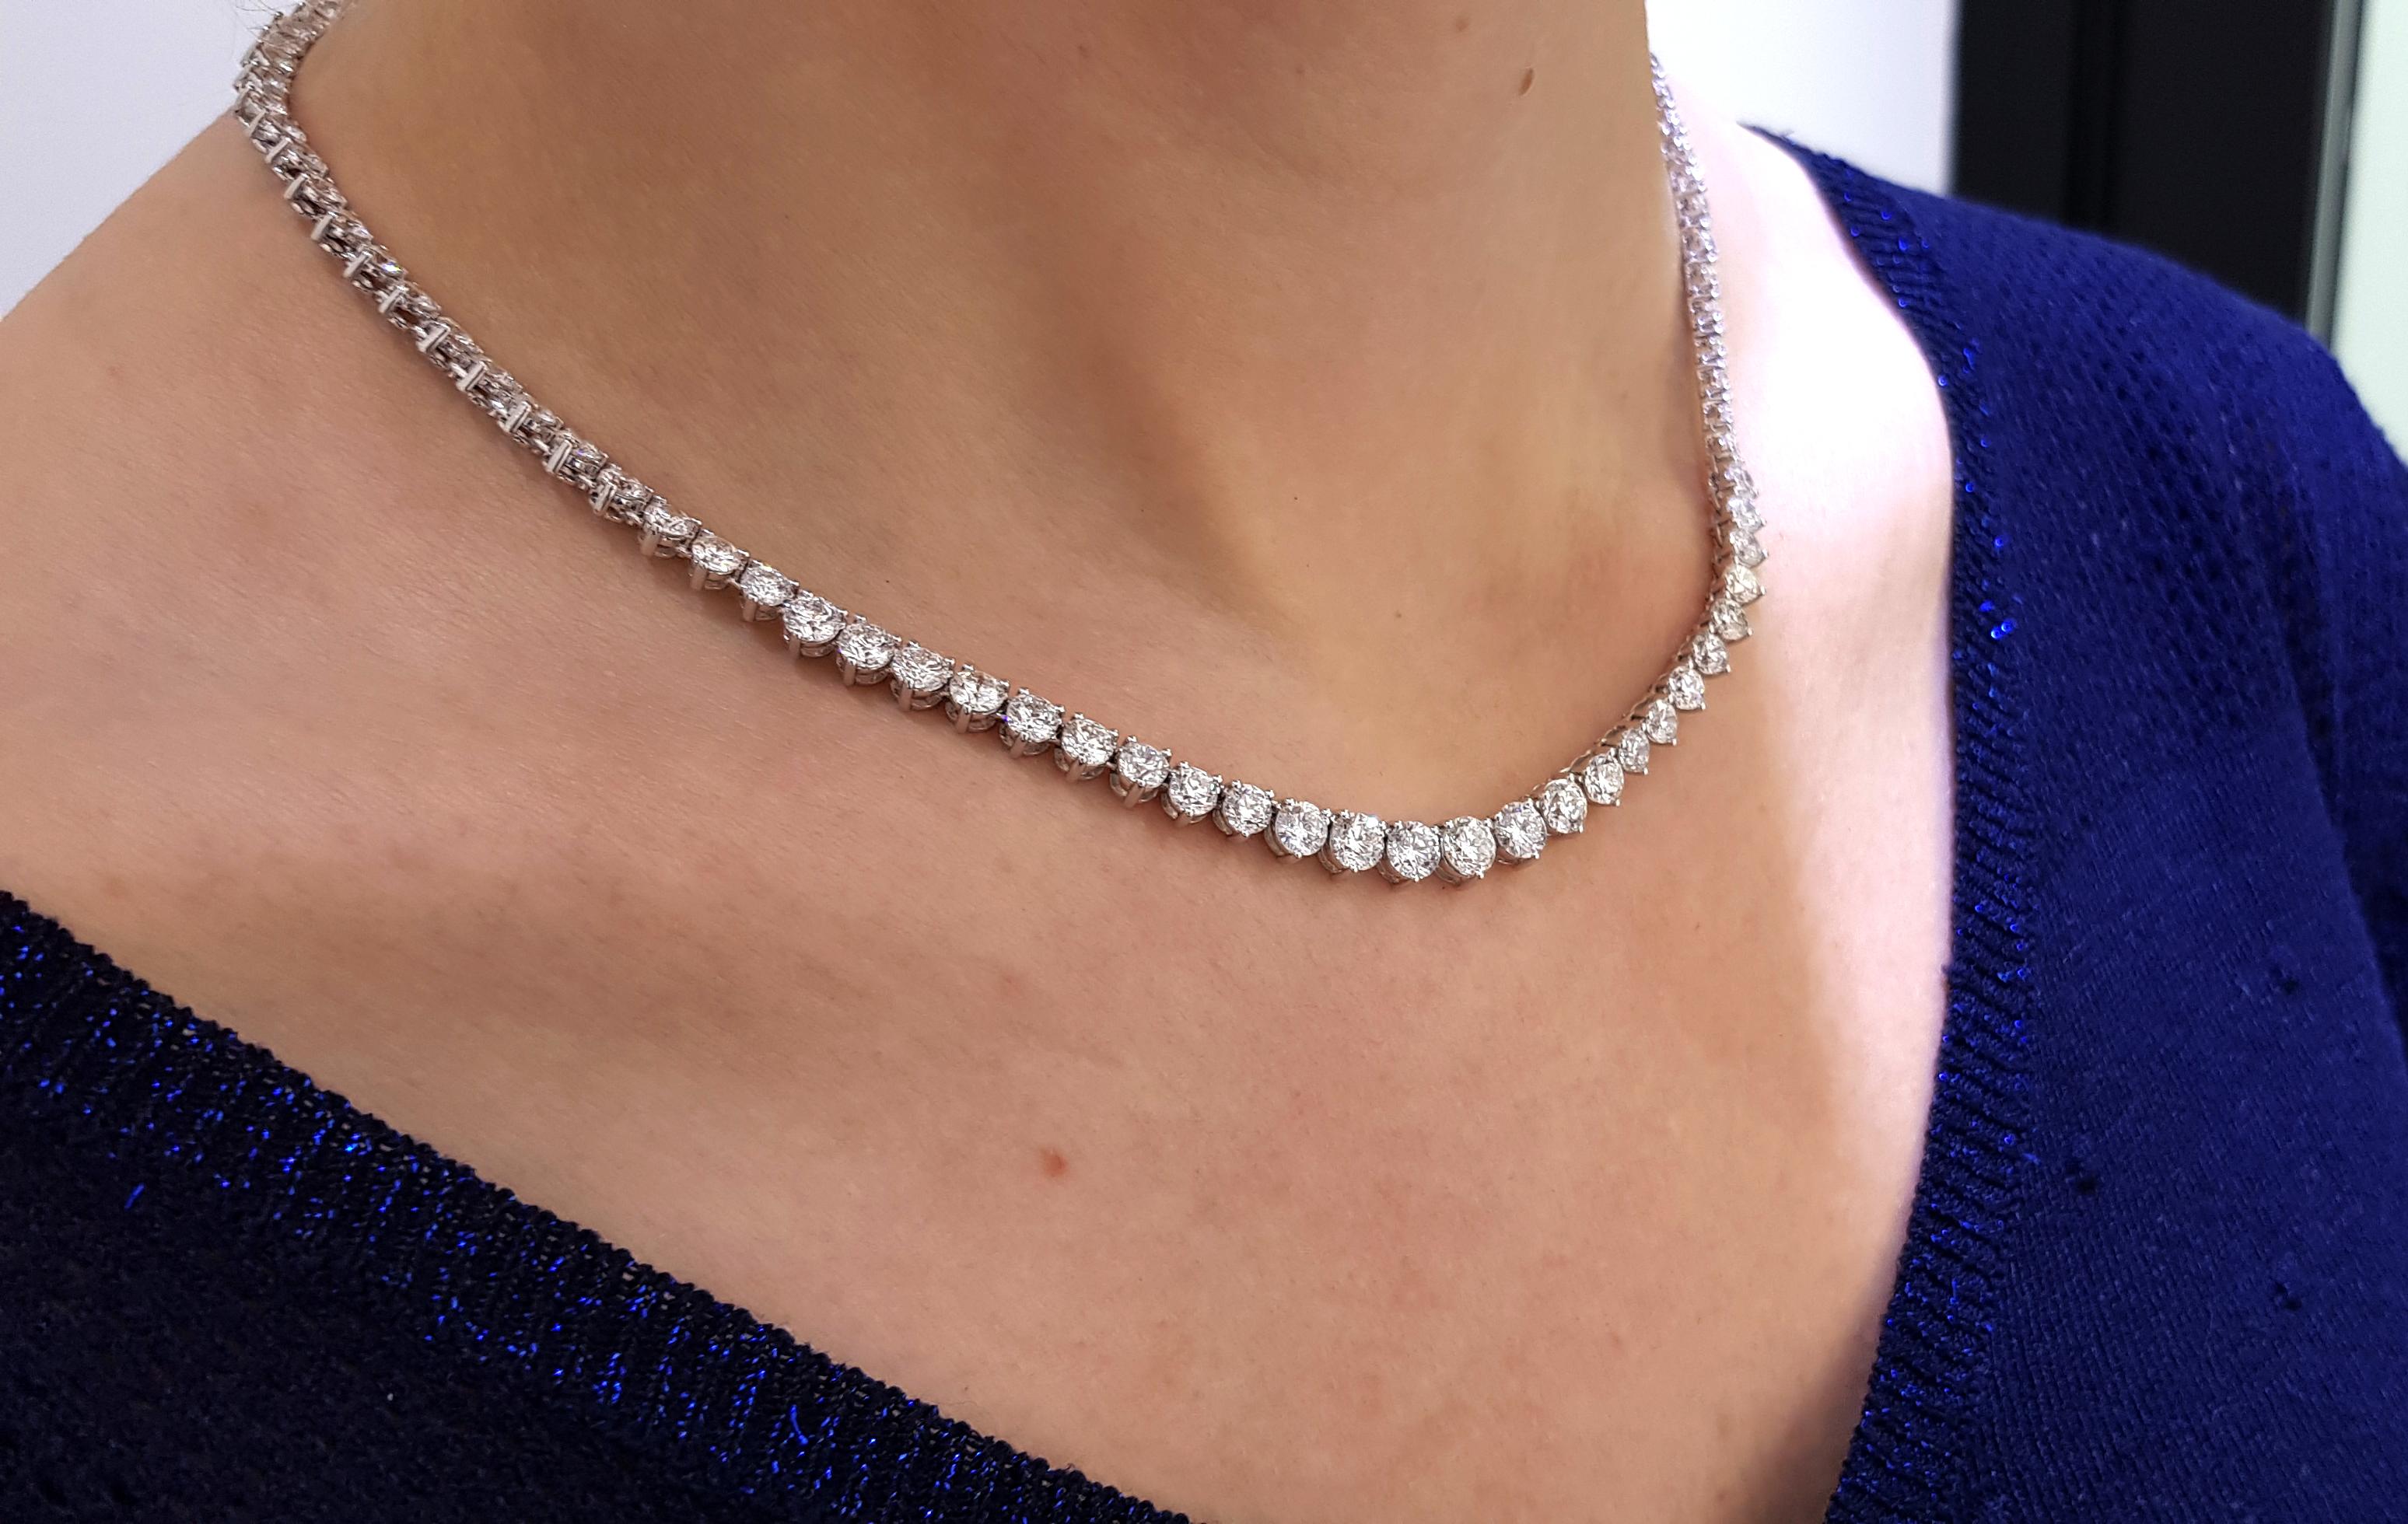 This stunning and impressive Riviera Necklace features substantial Diamond weight of 20.00 Carats in beautifully graduated Round Brilliant Cut gems with a sparkly white color H/I clarity SI1. Each stone has a three claw setting with open gallery and